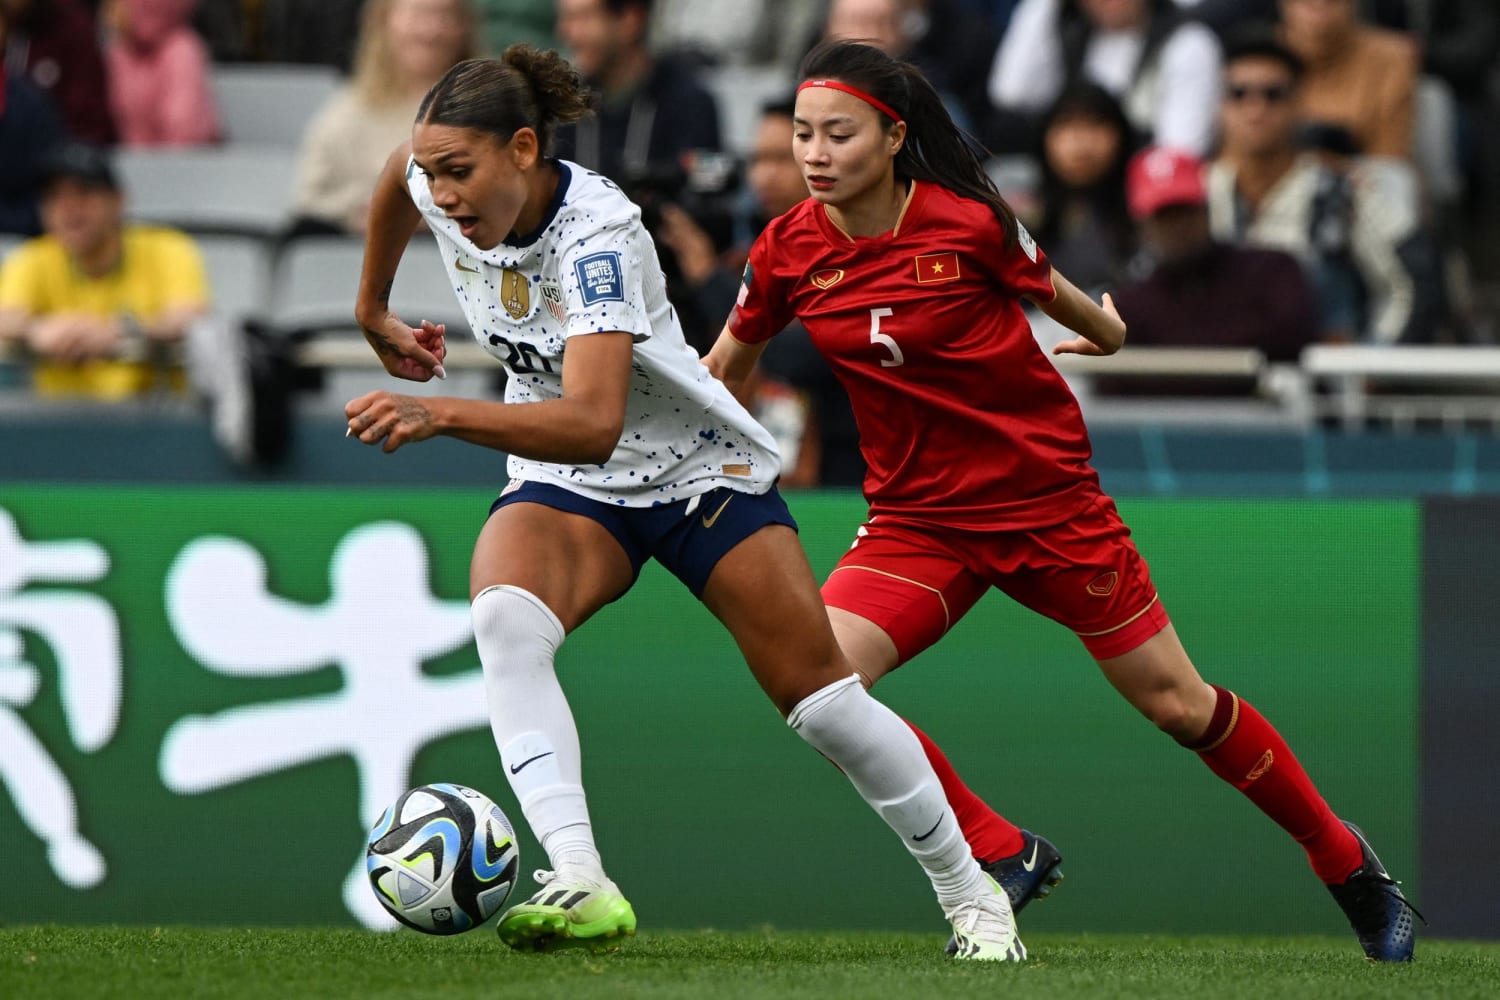 Dennis Rodman's daughter Trinity to play for USWNT at Women's World Cup